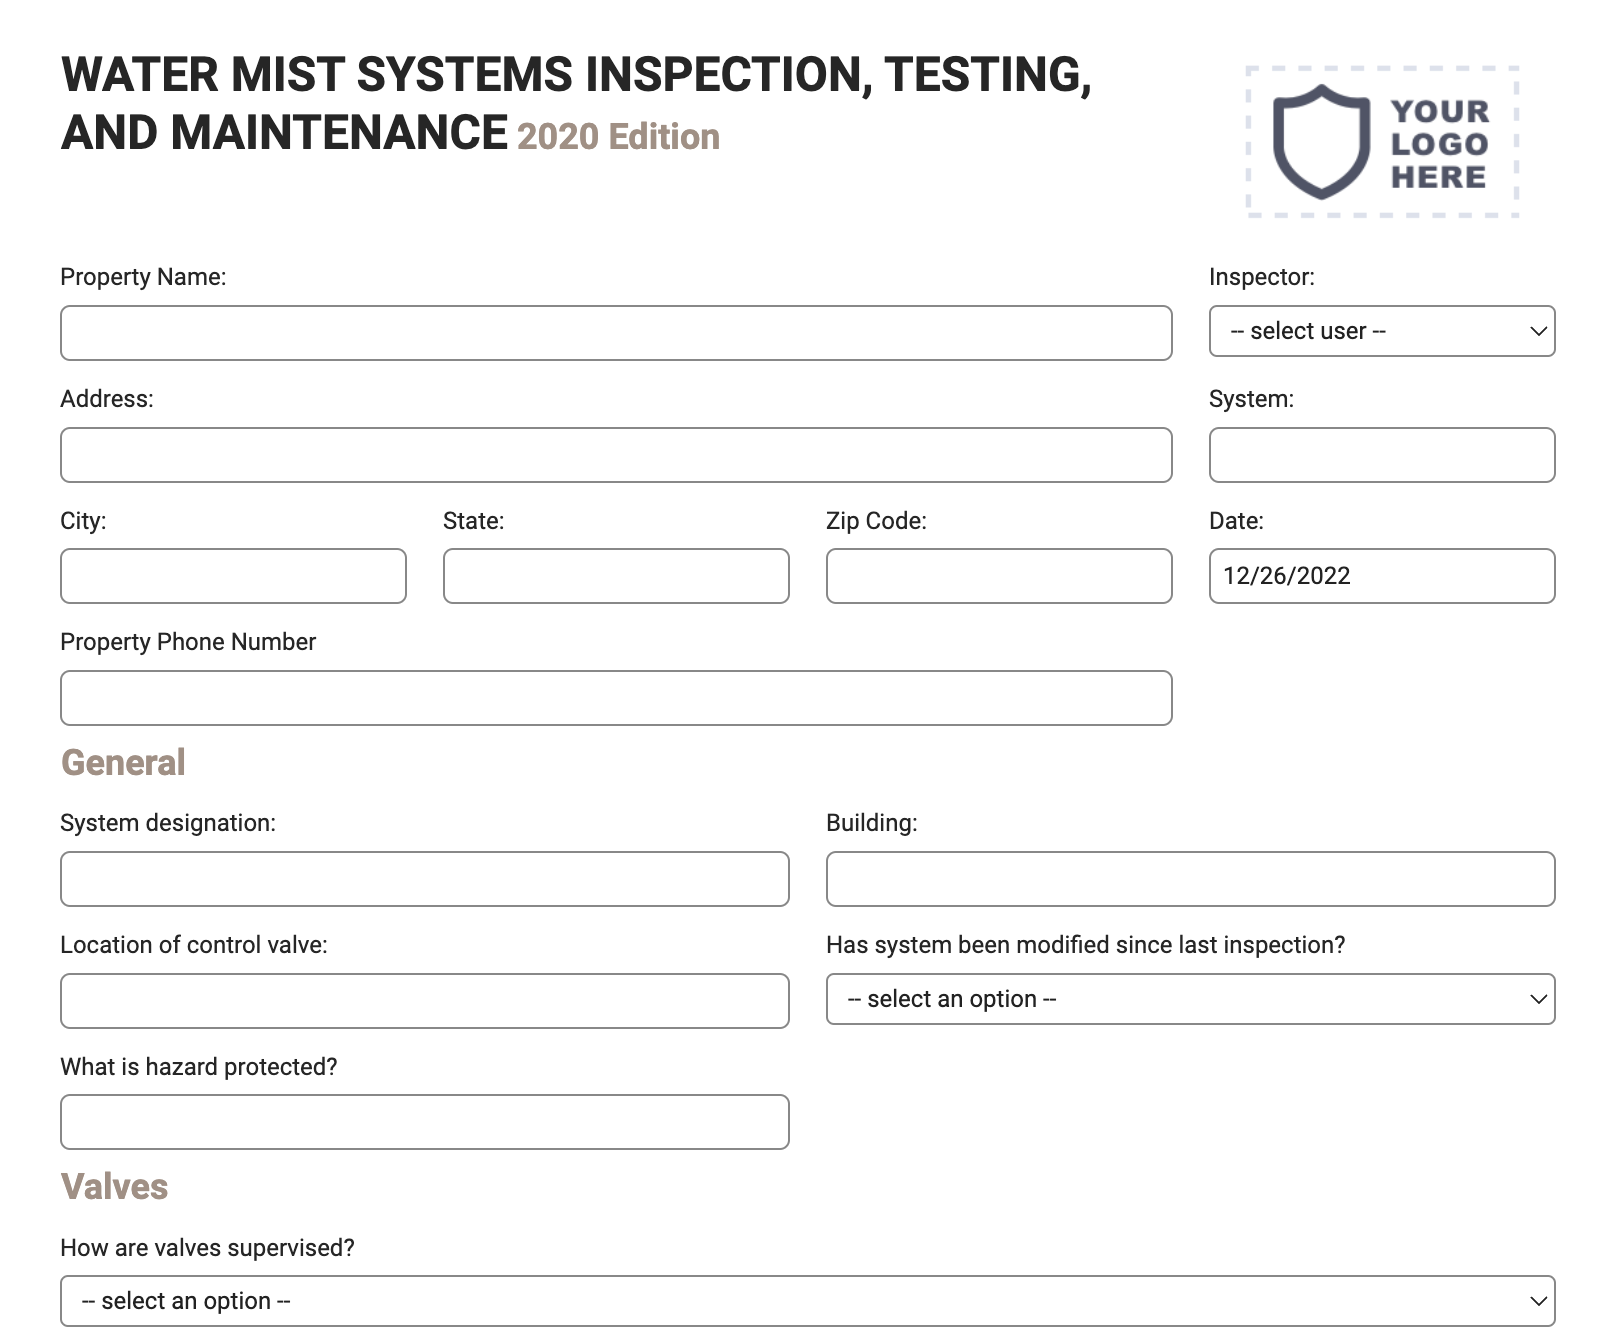 water mist systems inspection form